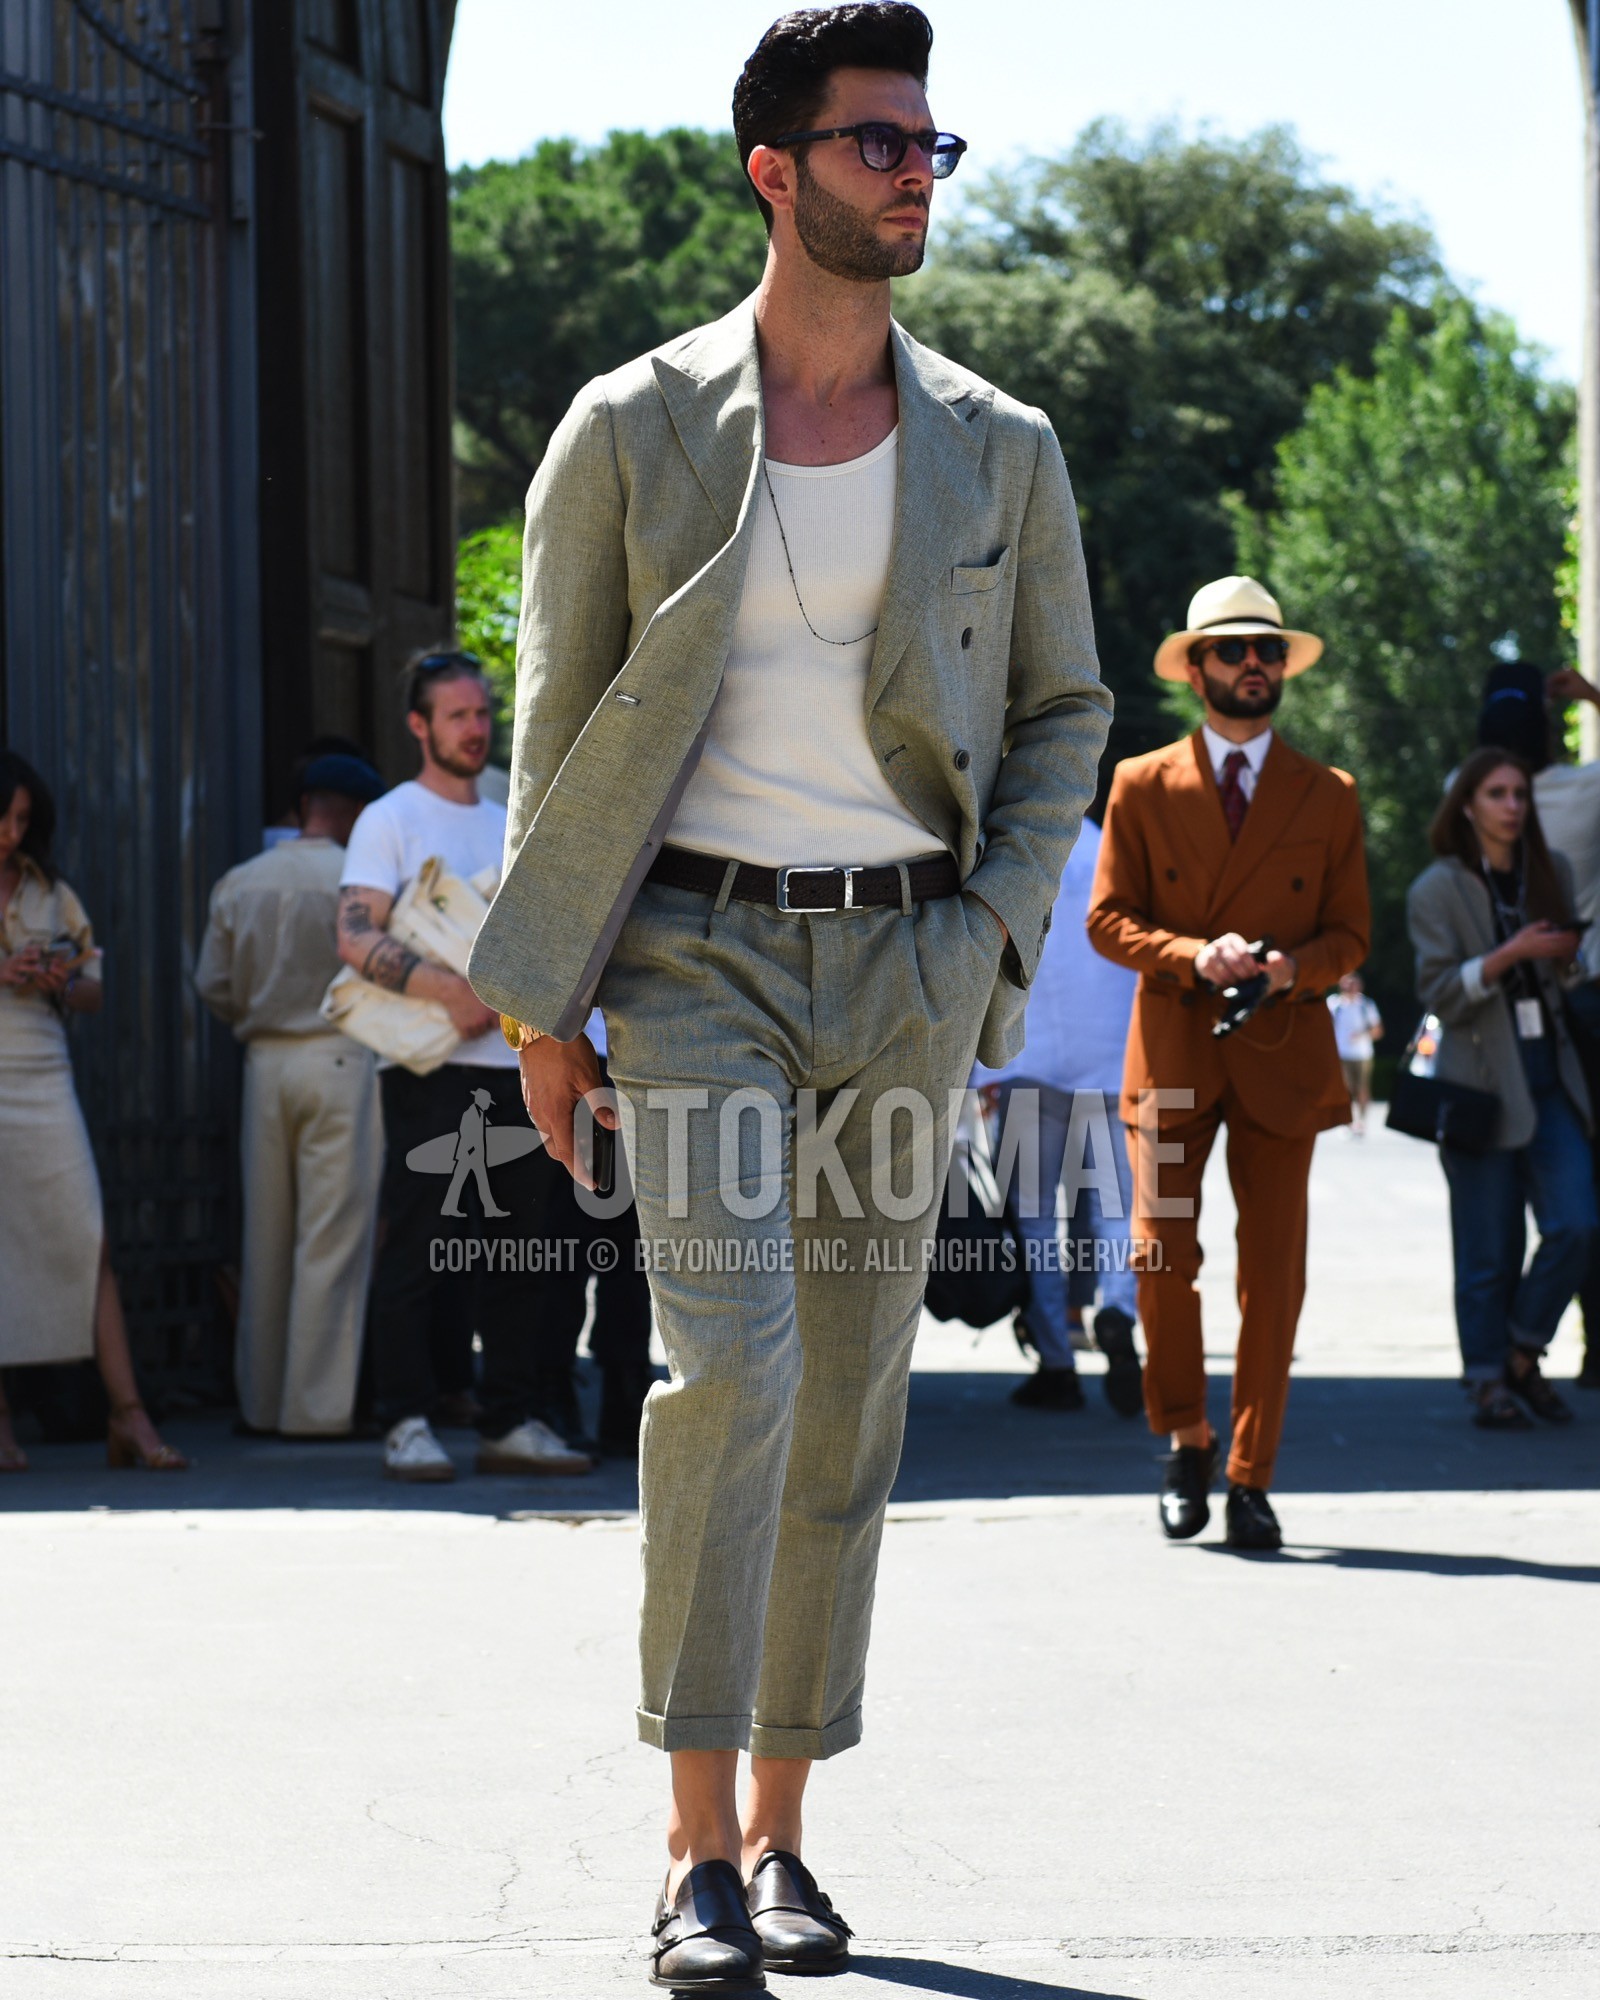 Men's spring summer outfit with black tortoiseshell sunglasses, white plain tank top, brown plain leather belt, brown monk shoes leather shoes, gray plain suit.